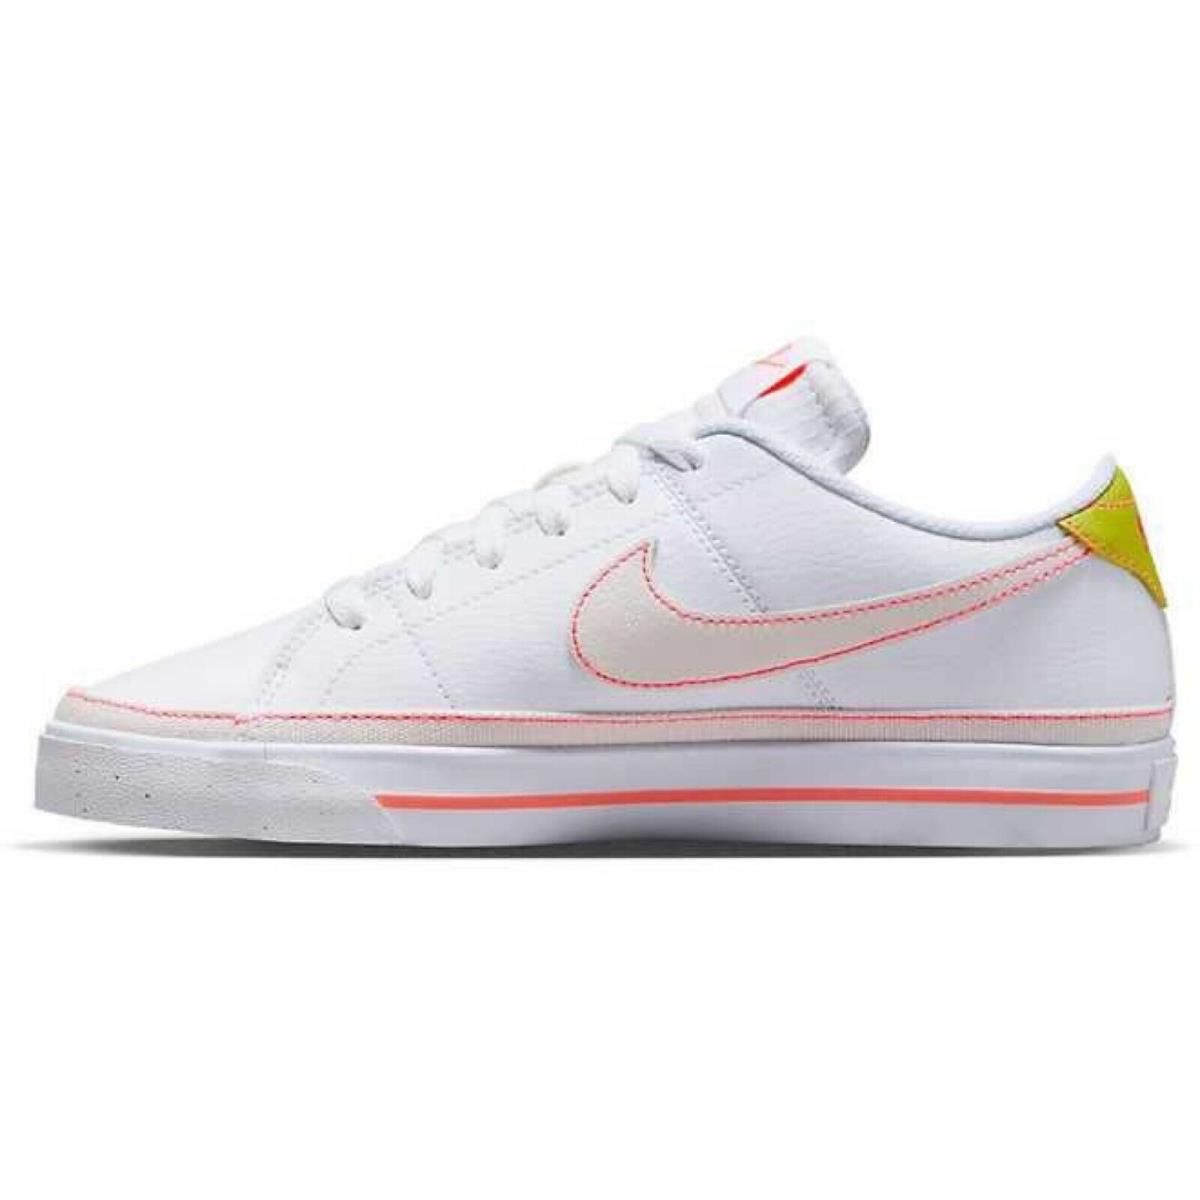 Nike shoes Court Legacy - White , White/Pink Punch/Green Cactus Manufacturer 1